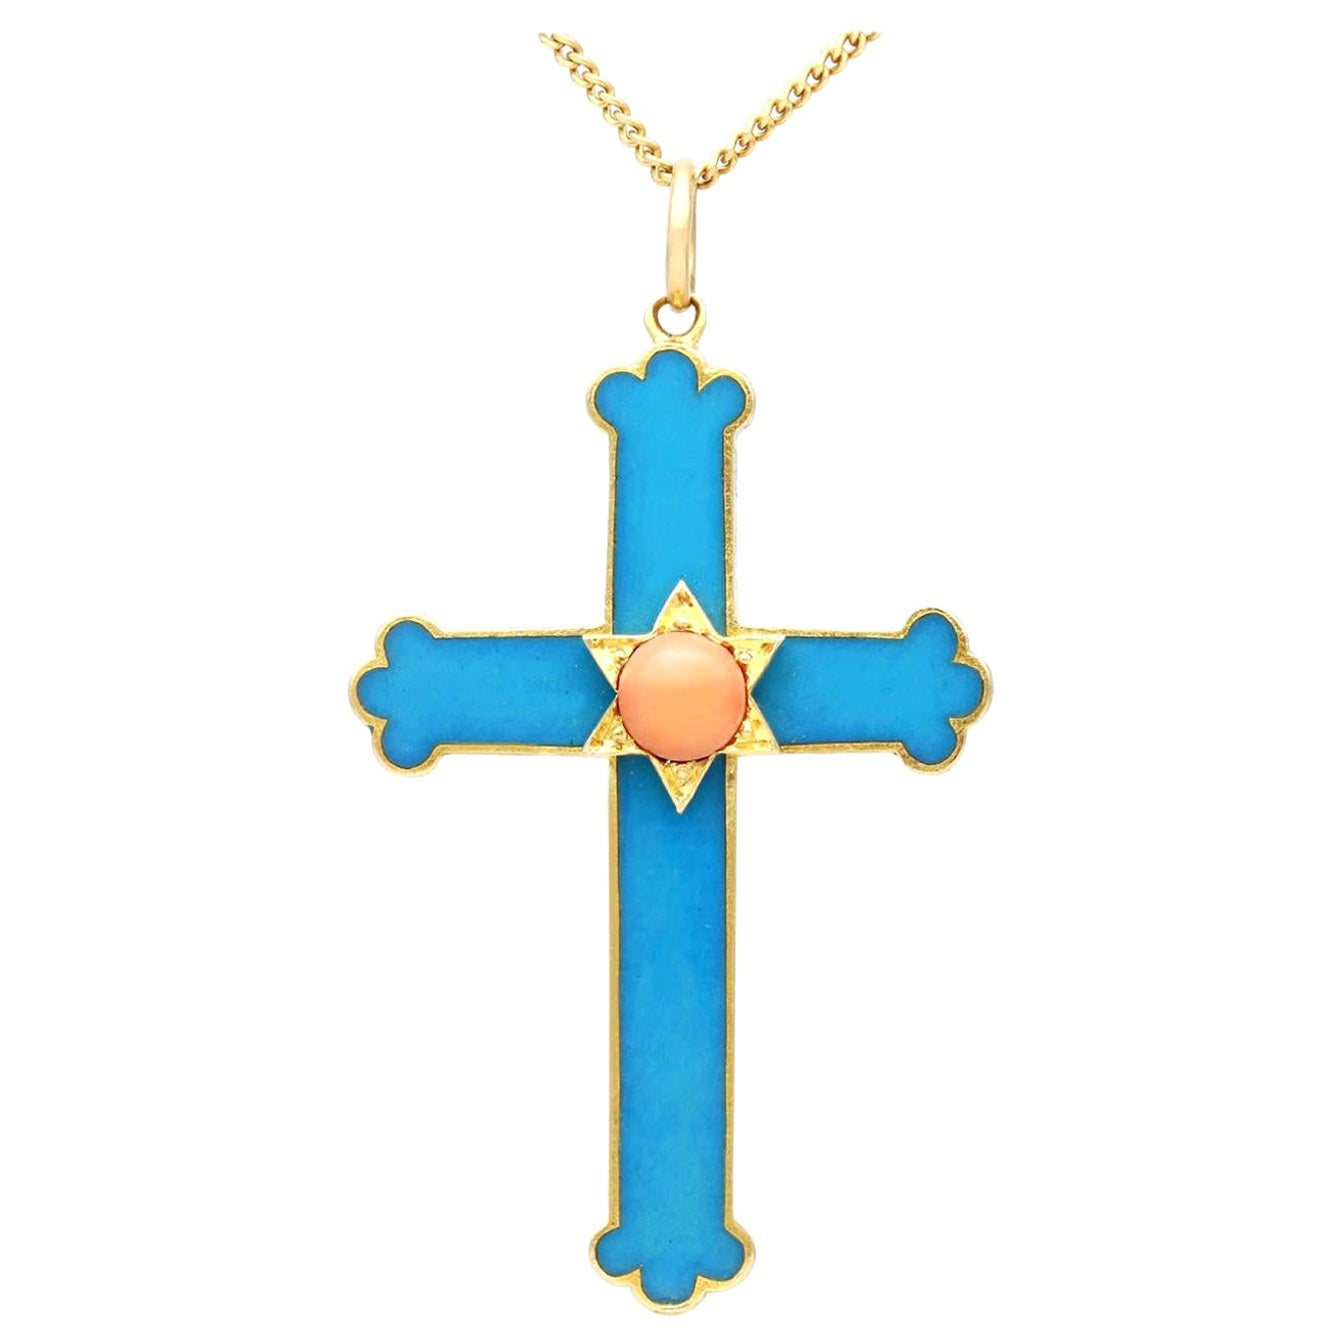 Antique Coral and Enamel Yellow Gold Cross Pendant